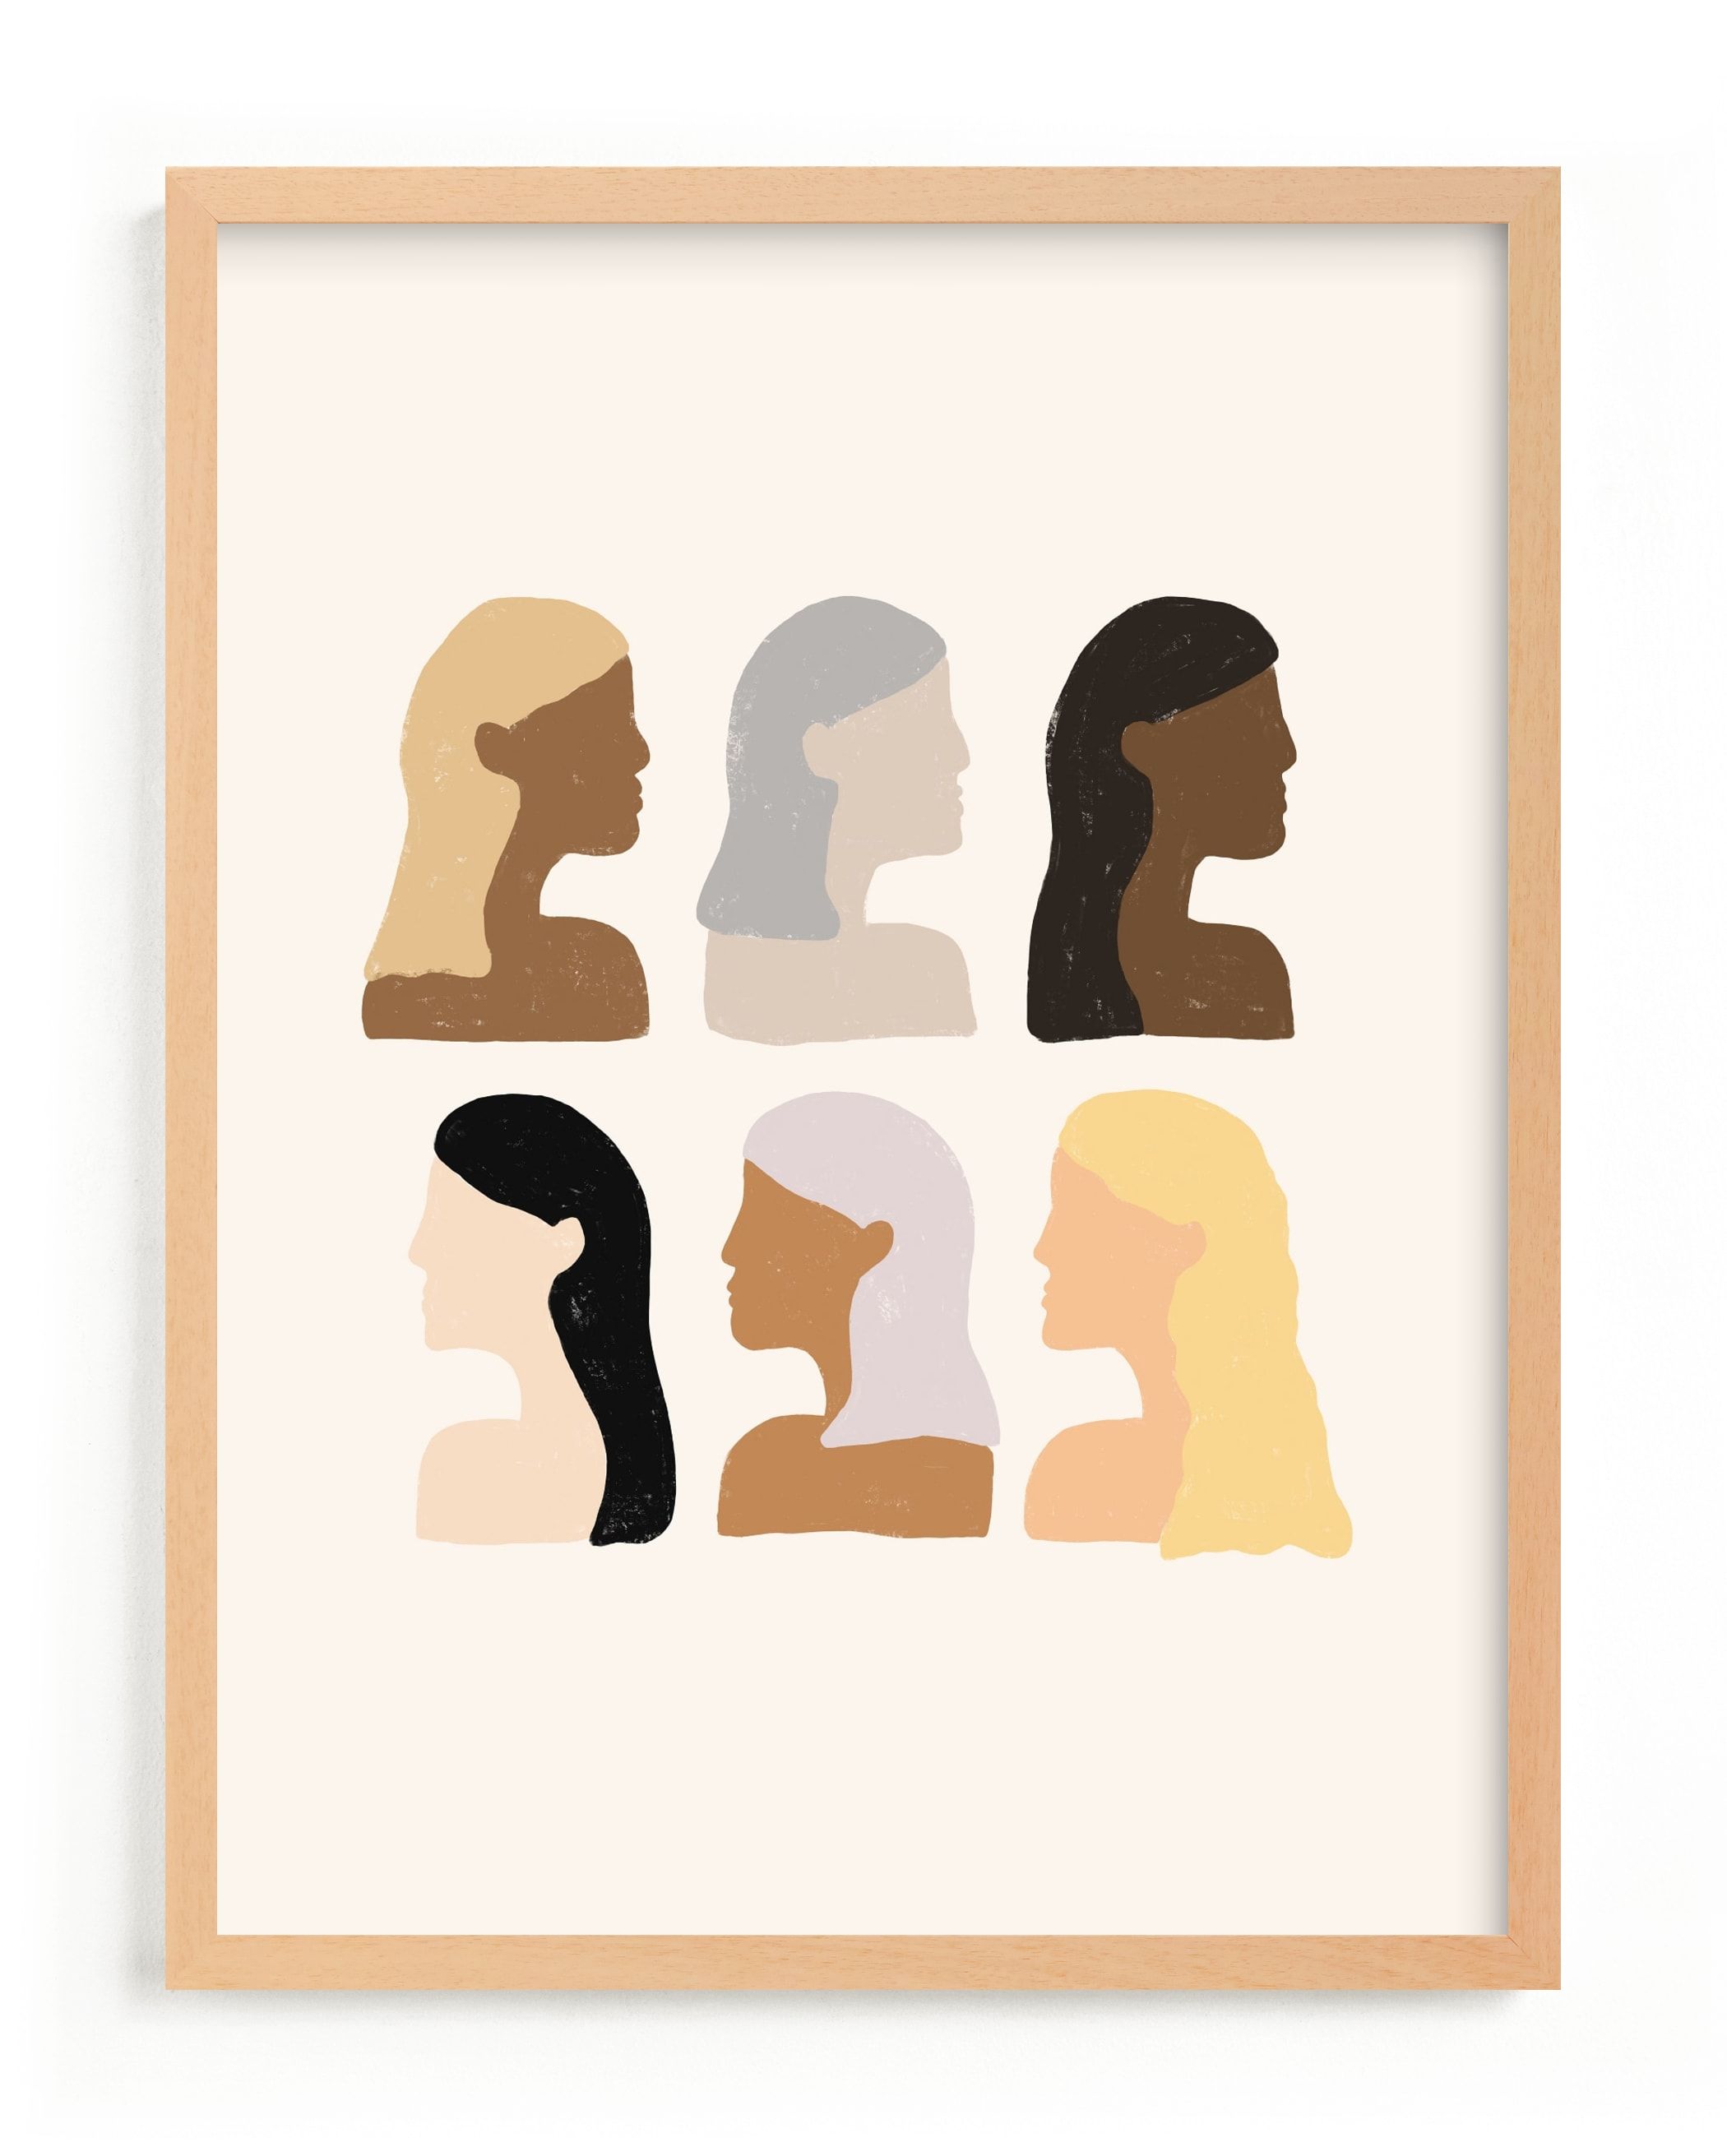 "Girls Support Girls" - Graphic Limited Edition Art Print by Amanda Houston. | Minted